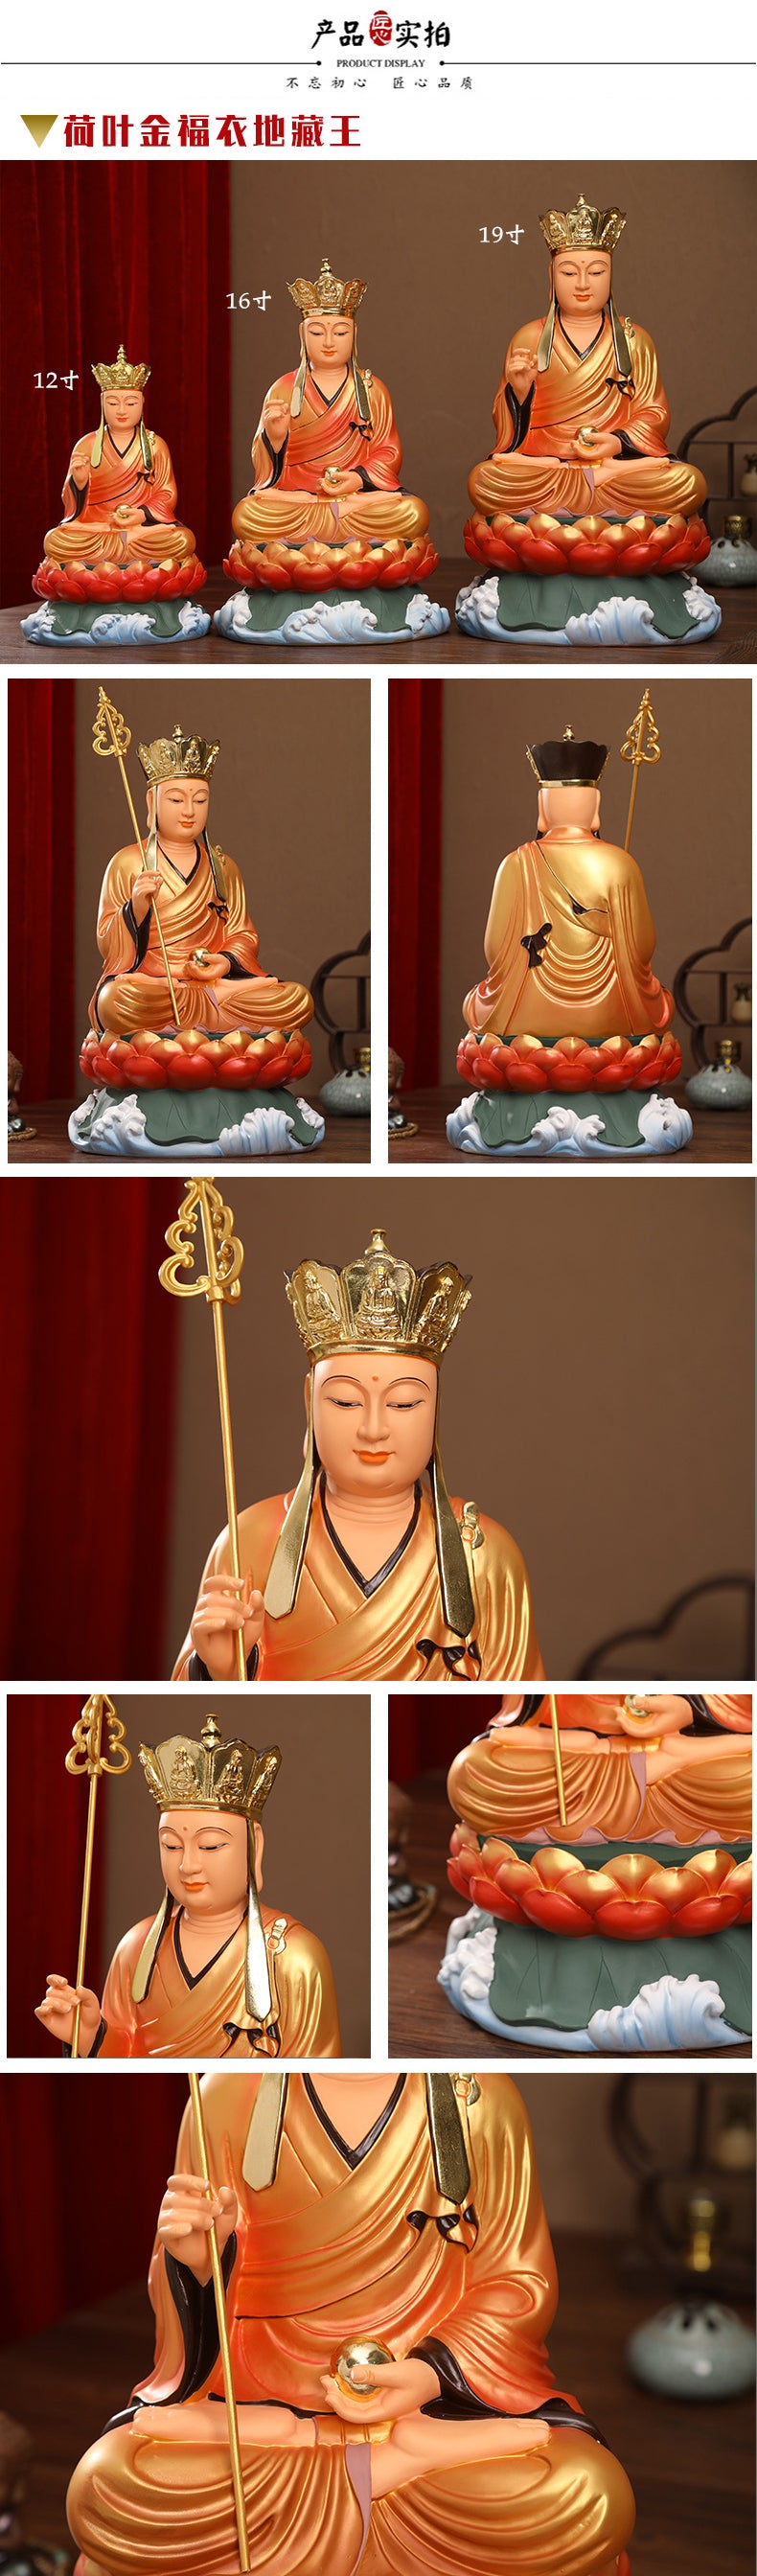 Earth Store, Dizang, Ksitigarbha Bodhisattva Statue on Lotus for Sale, Golden Blessed Clothes Resin Material, Offerings Product Detail Statement-4